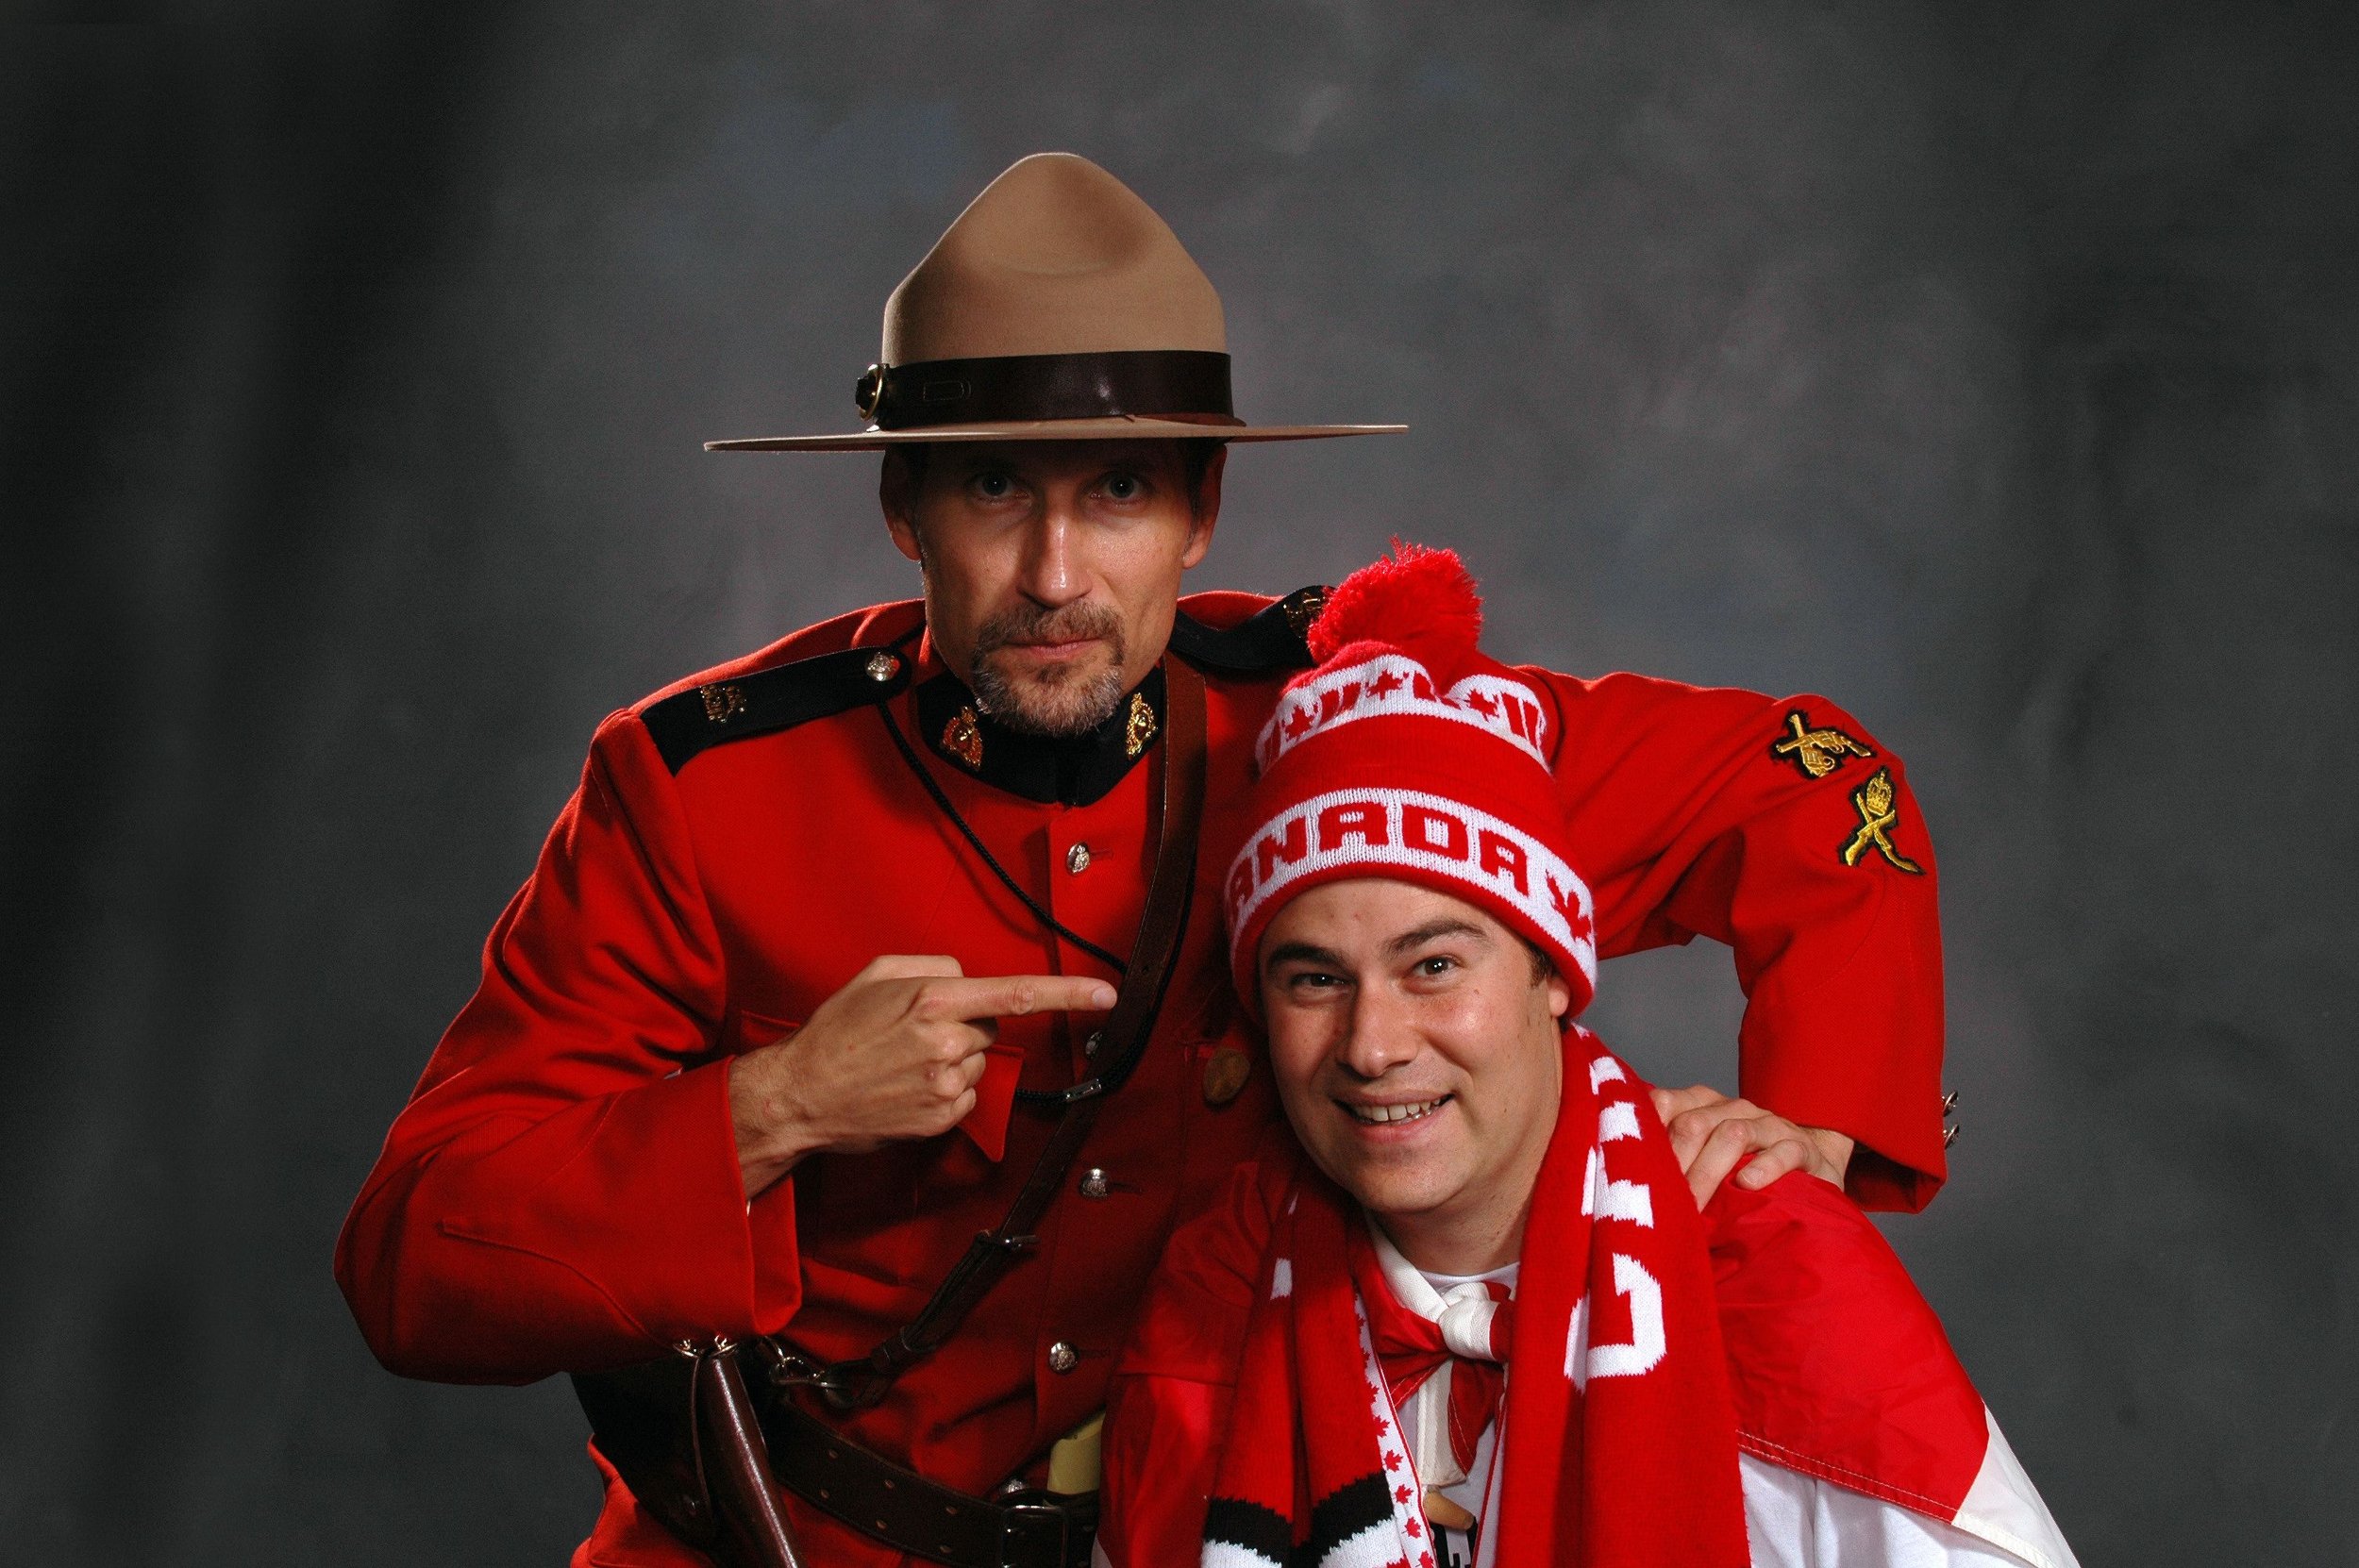 mountie and canadiana.jpg